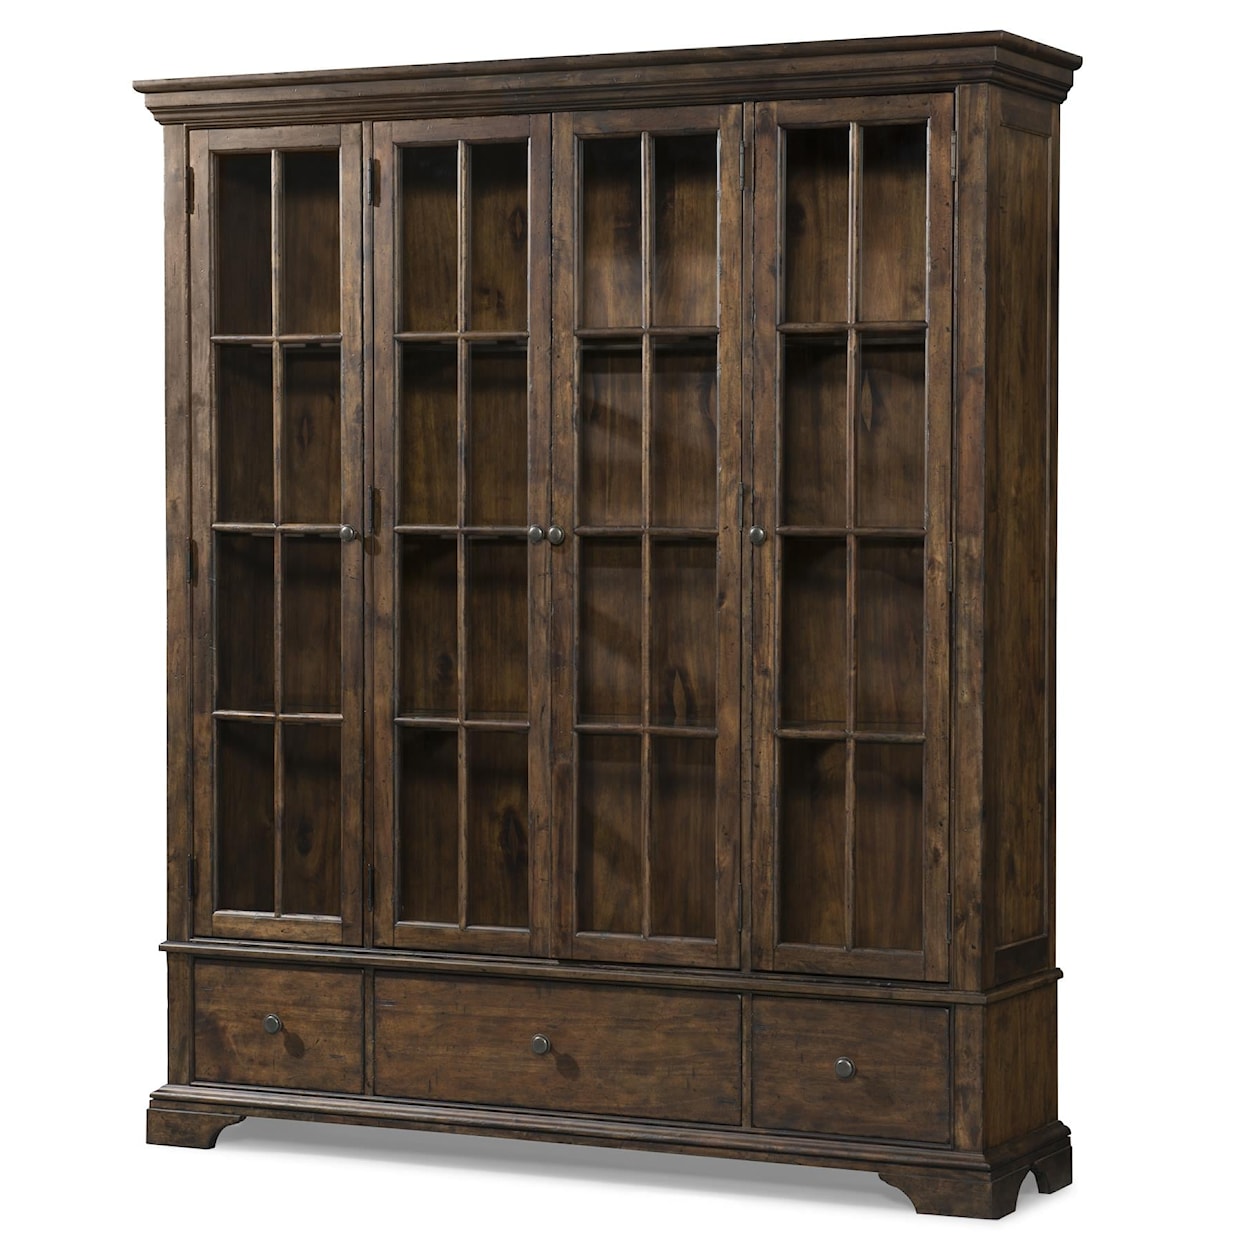 Trisha Yearwood Home Collection by Legacy Classic Trisha Yearwood Home Monticello Display China Cabinet Base